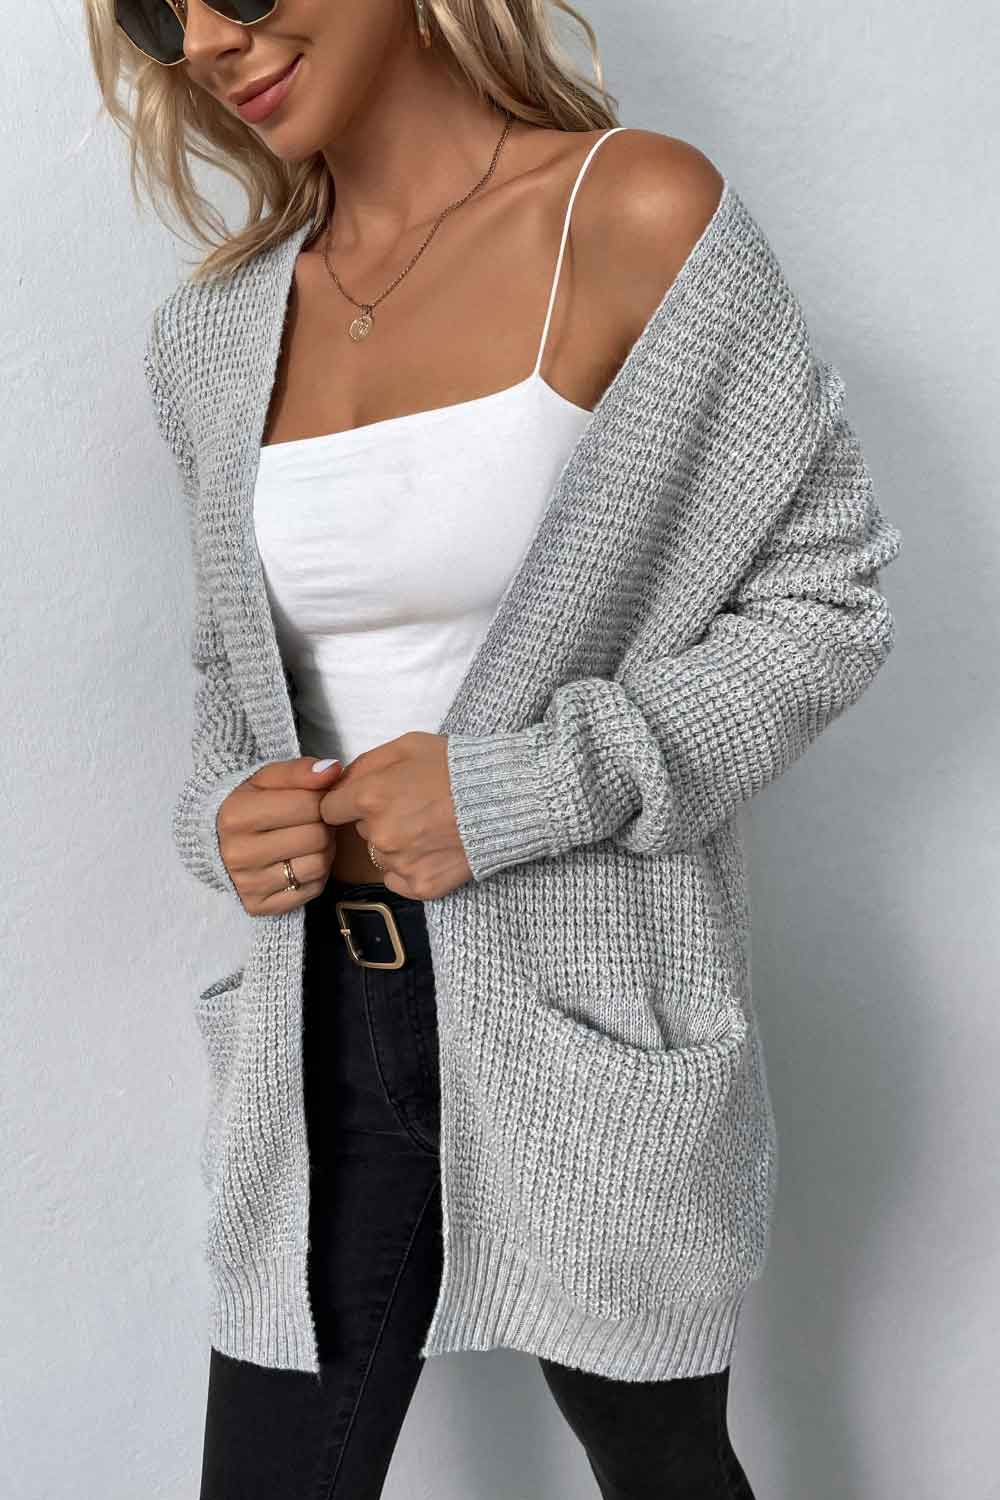 Rib-Knit Open Front Pocketed Cardigan - Women’s Clothing & Accessories - Shirts & Tops - 6 - 2024